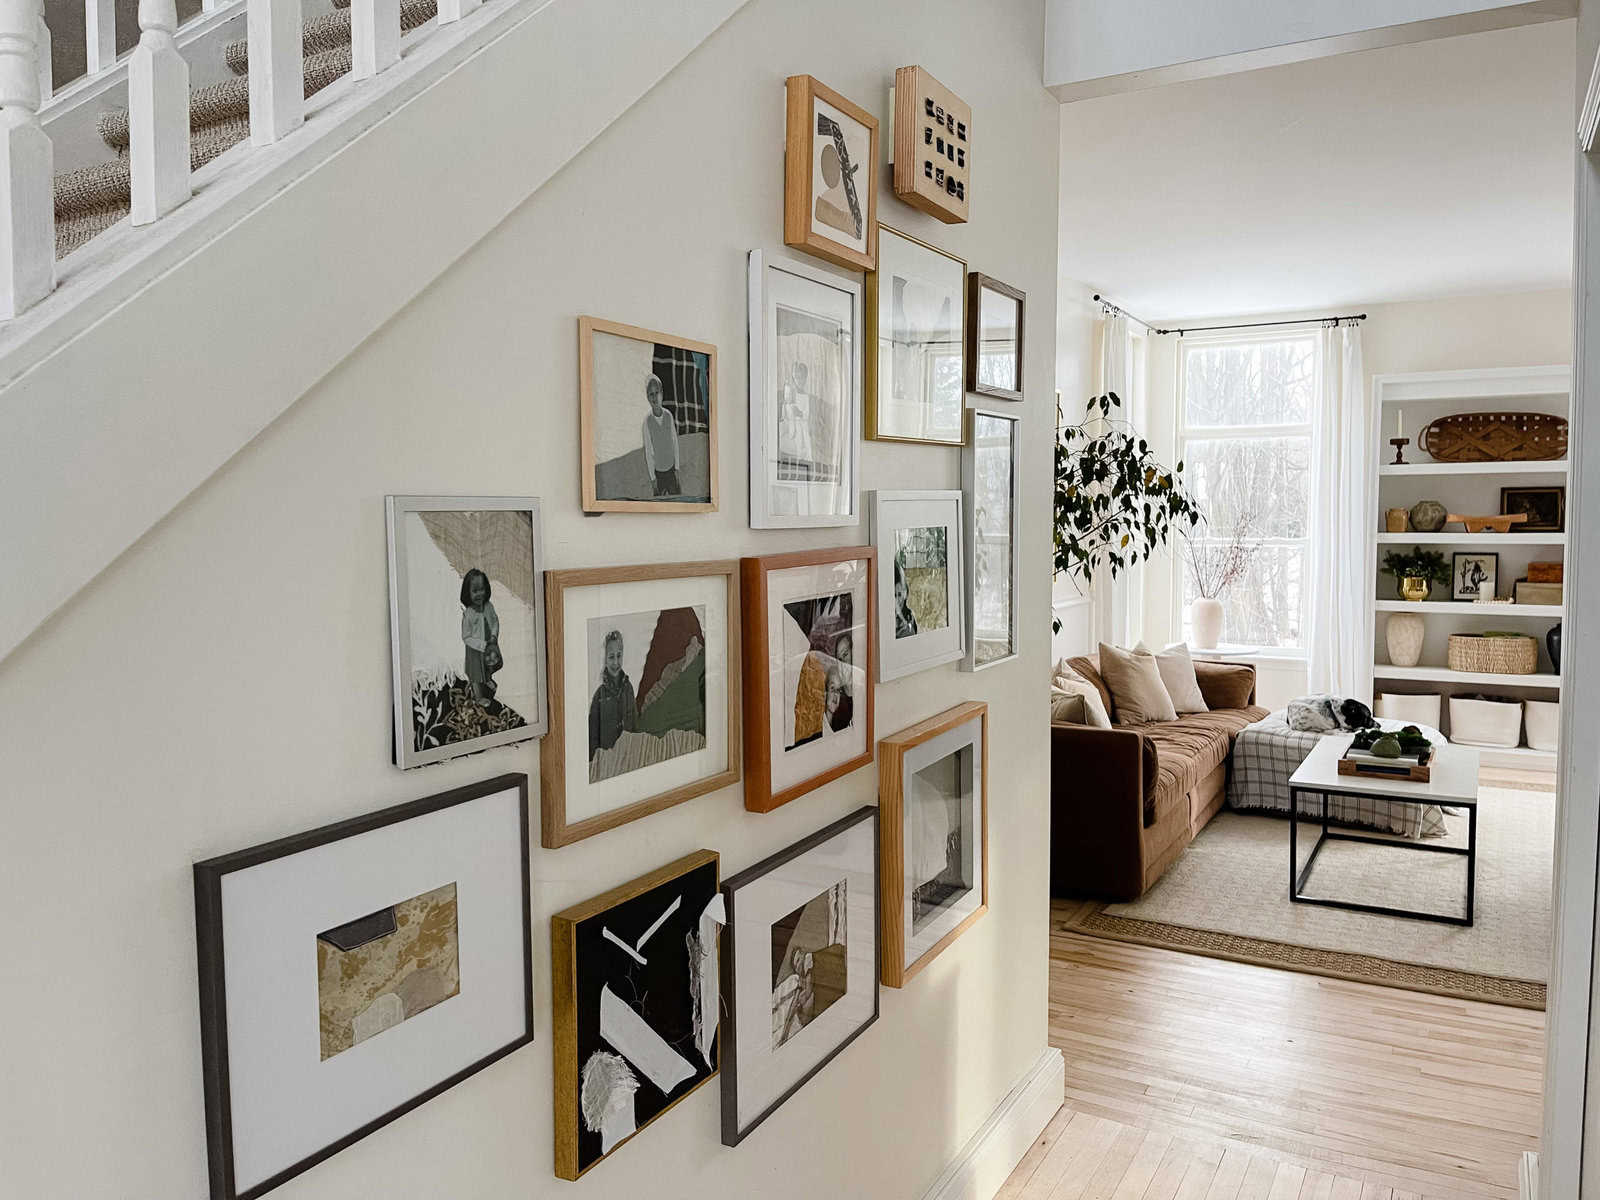 A hallway in a home with a photo gallery wall.